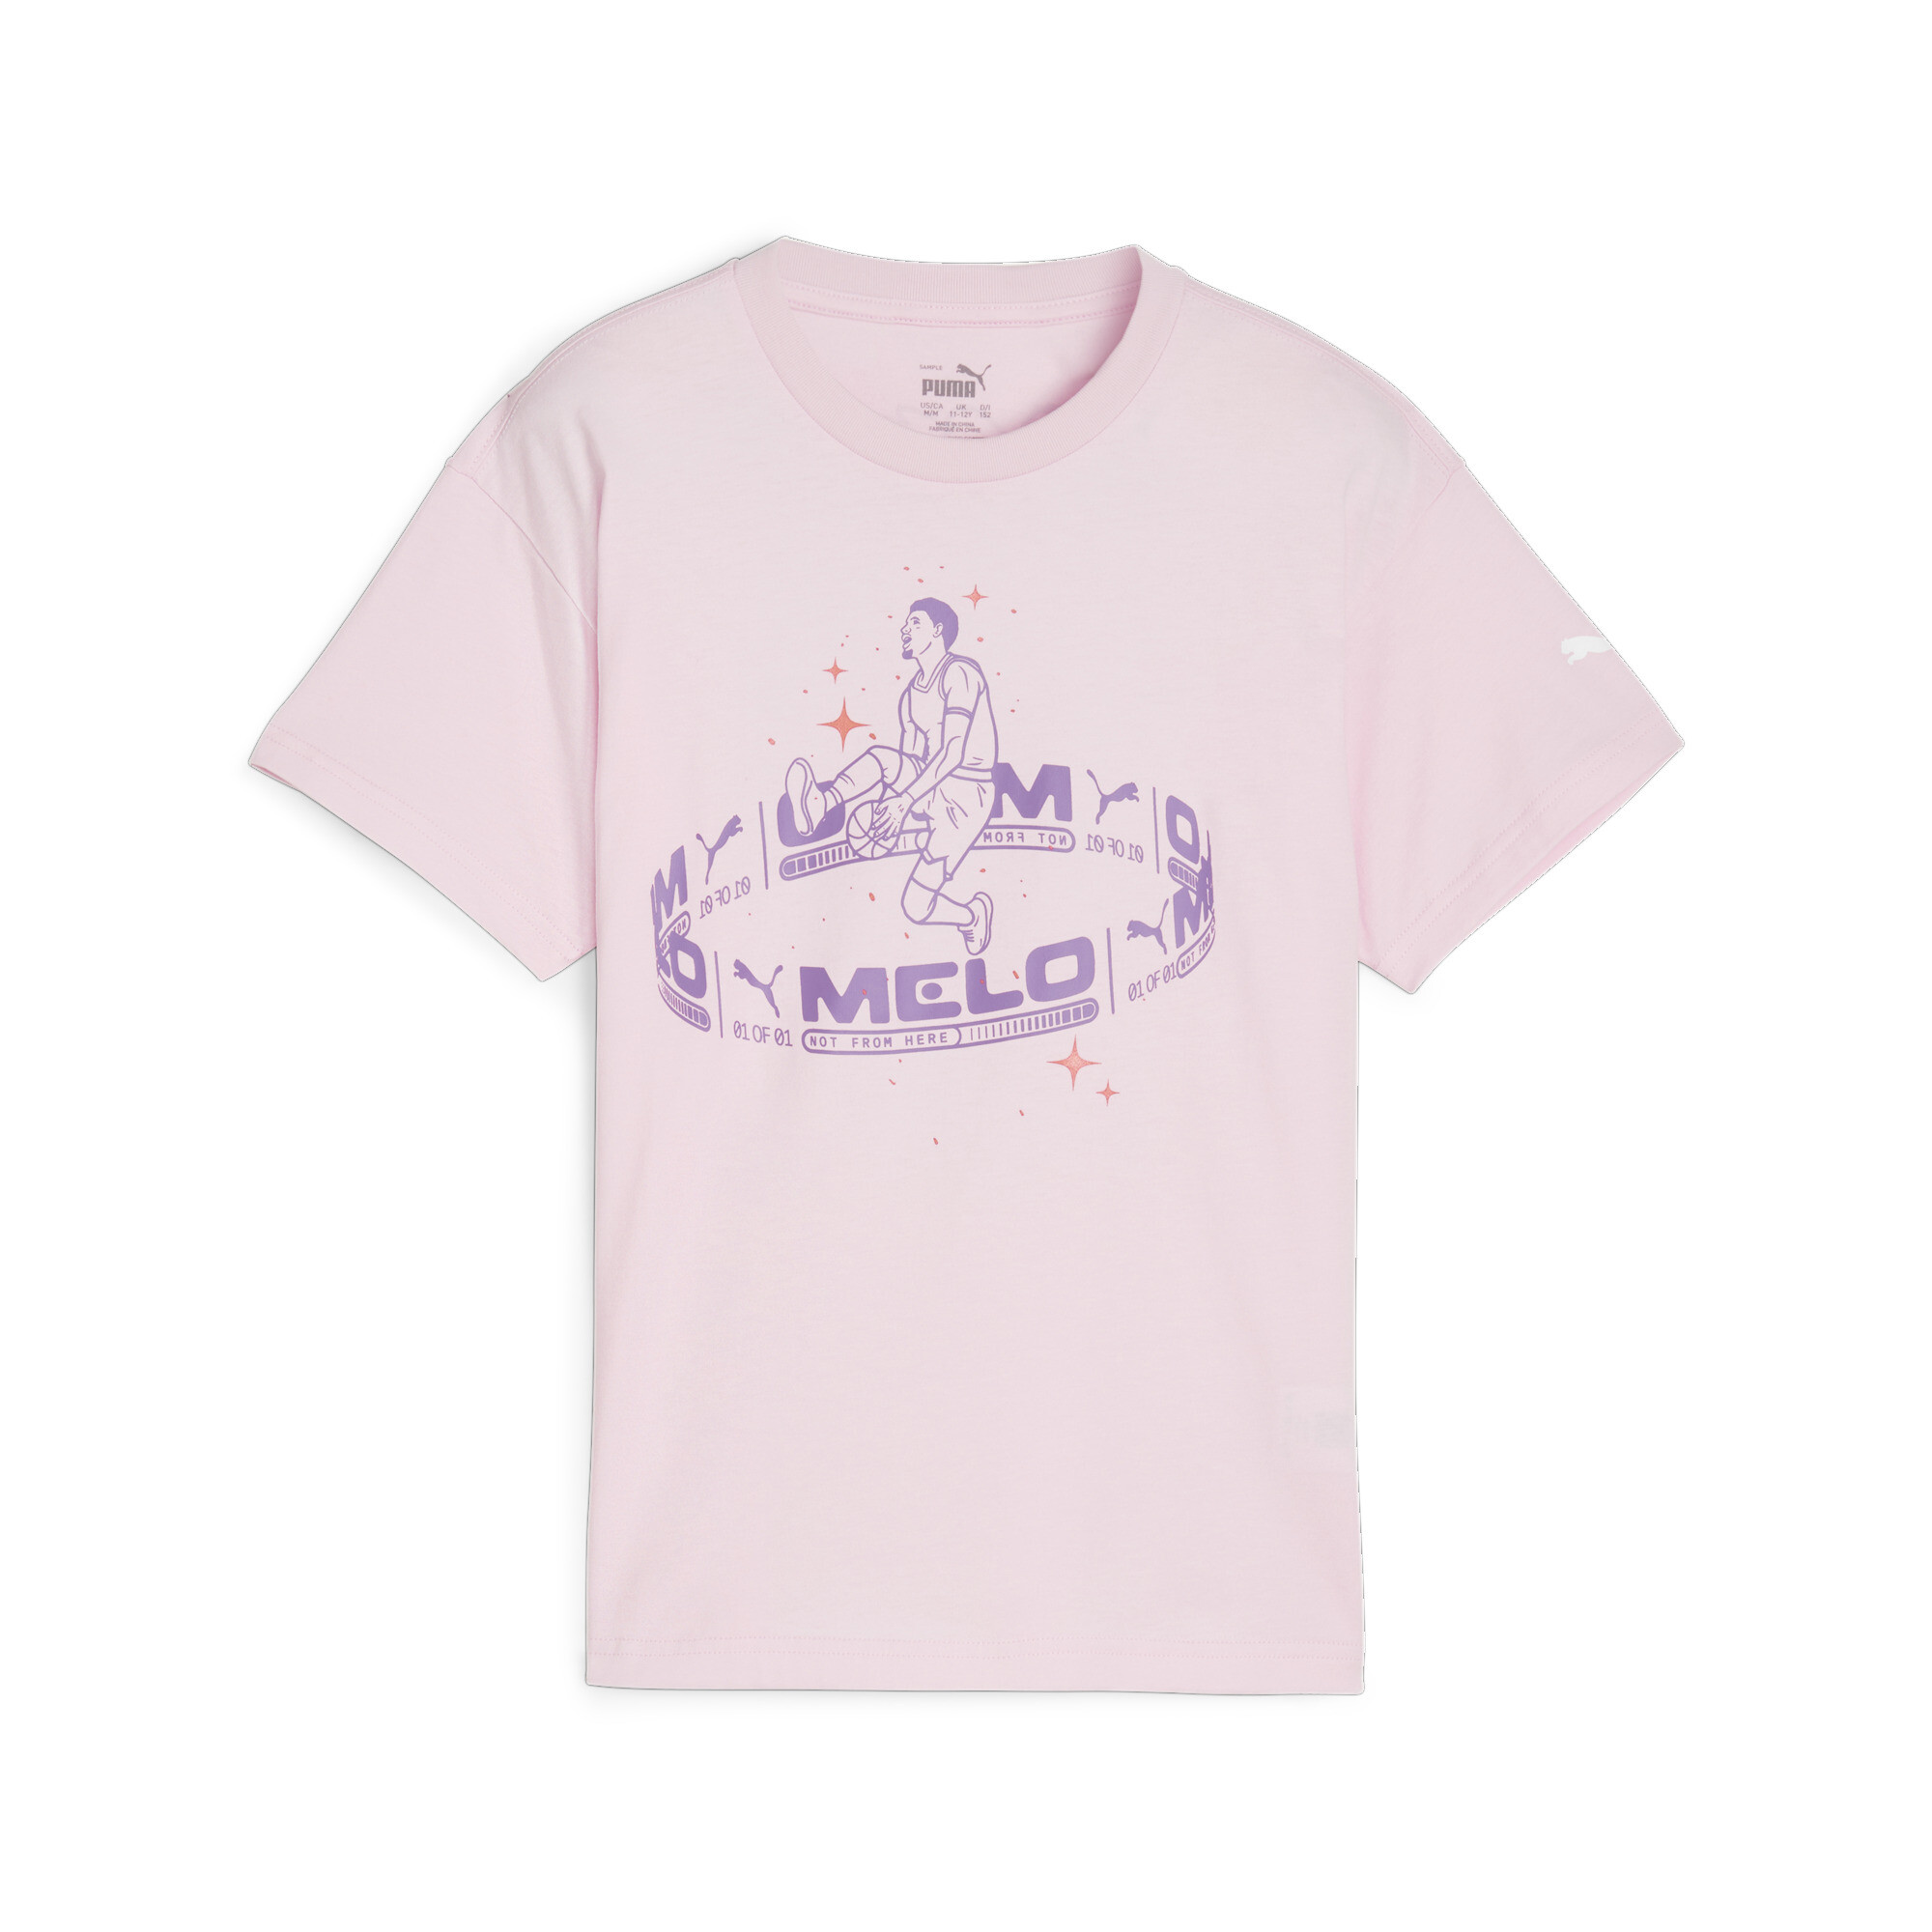 Puma MELO IRIDESCENT Boys' T-Shirt, Pink, Size 13-14Y, Age